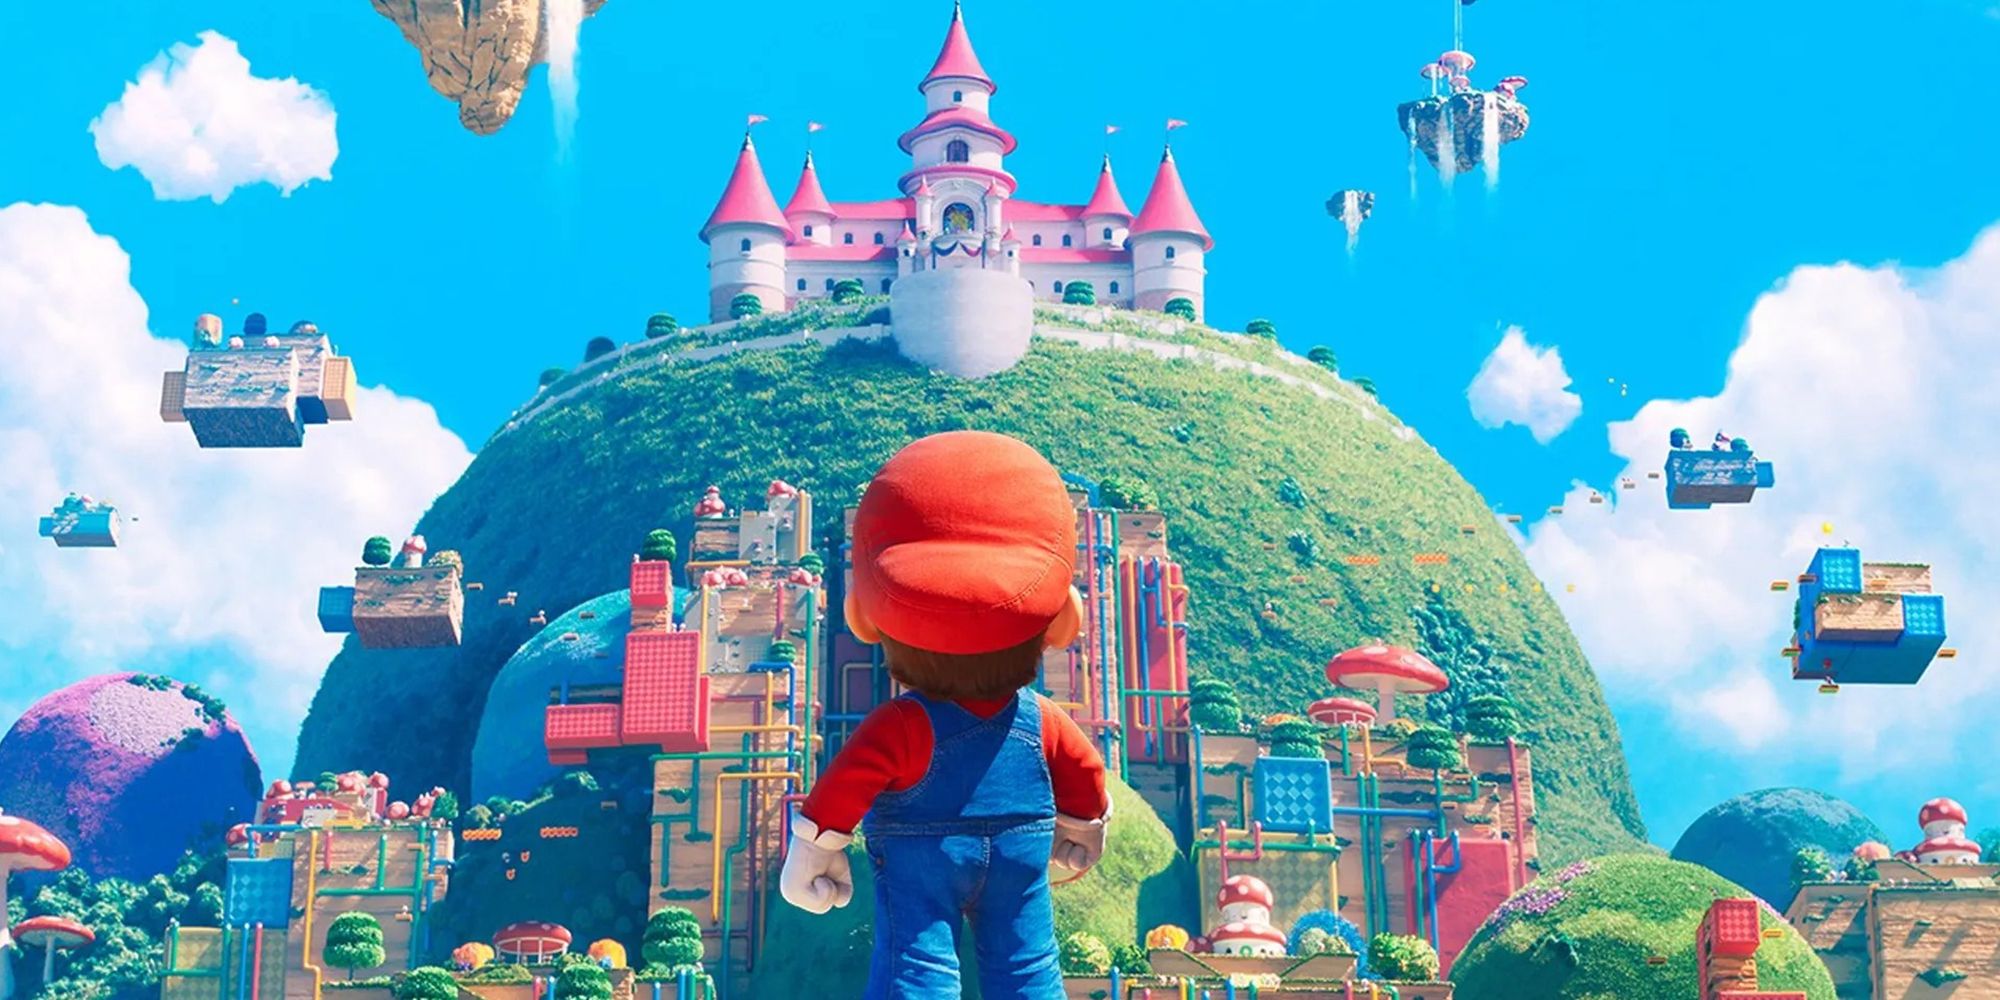 Image From The Super Mario Movie Trailer